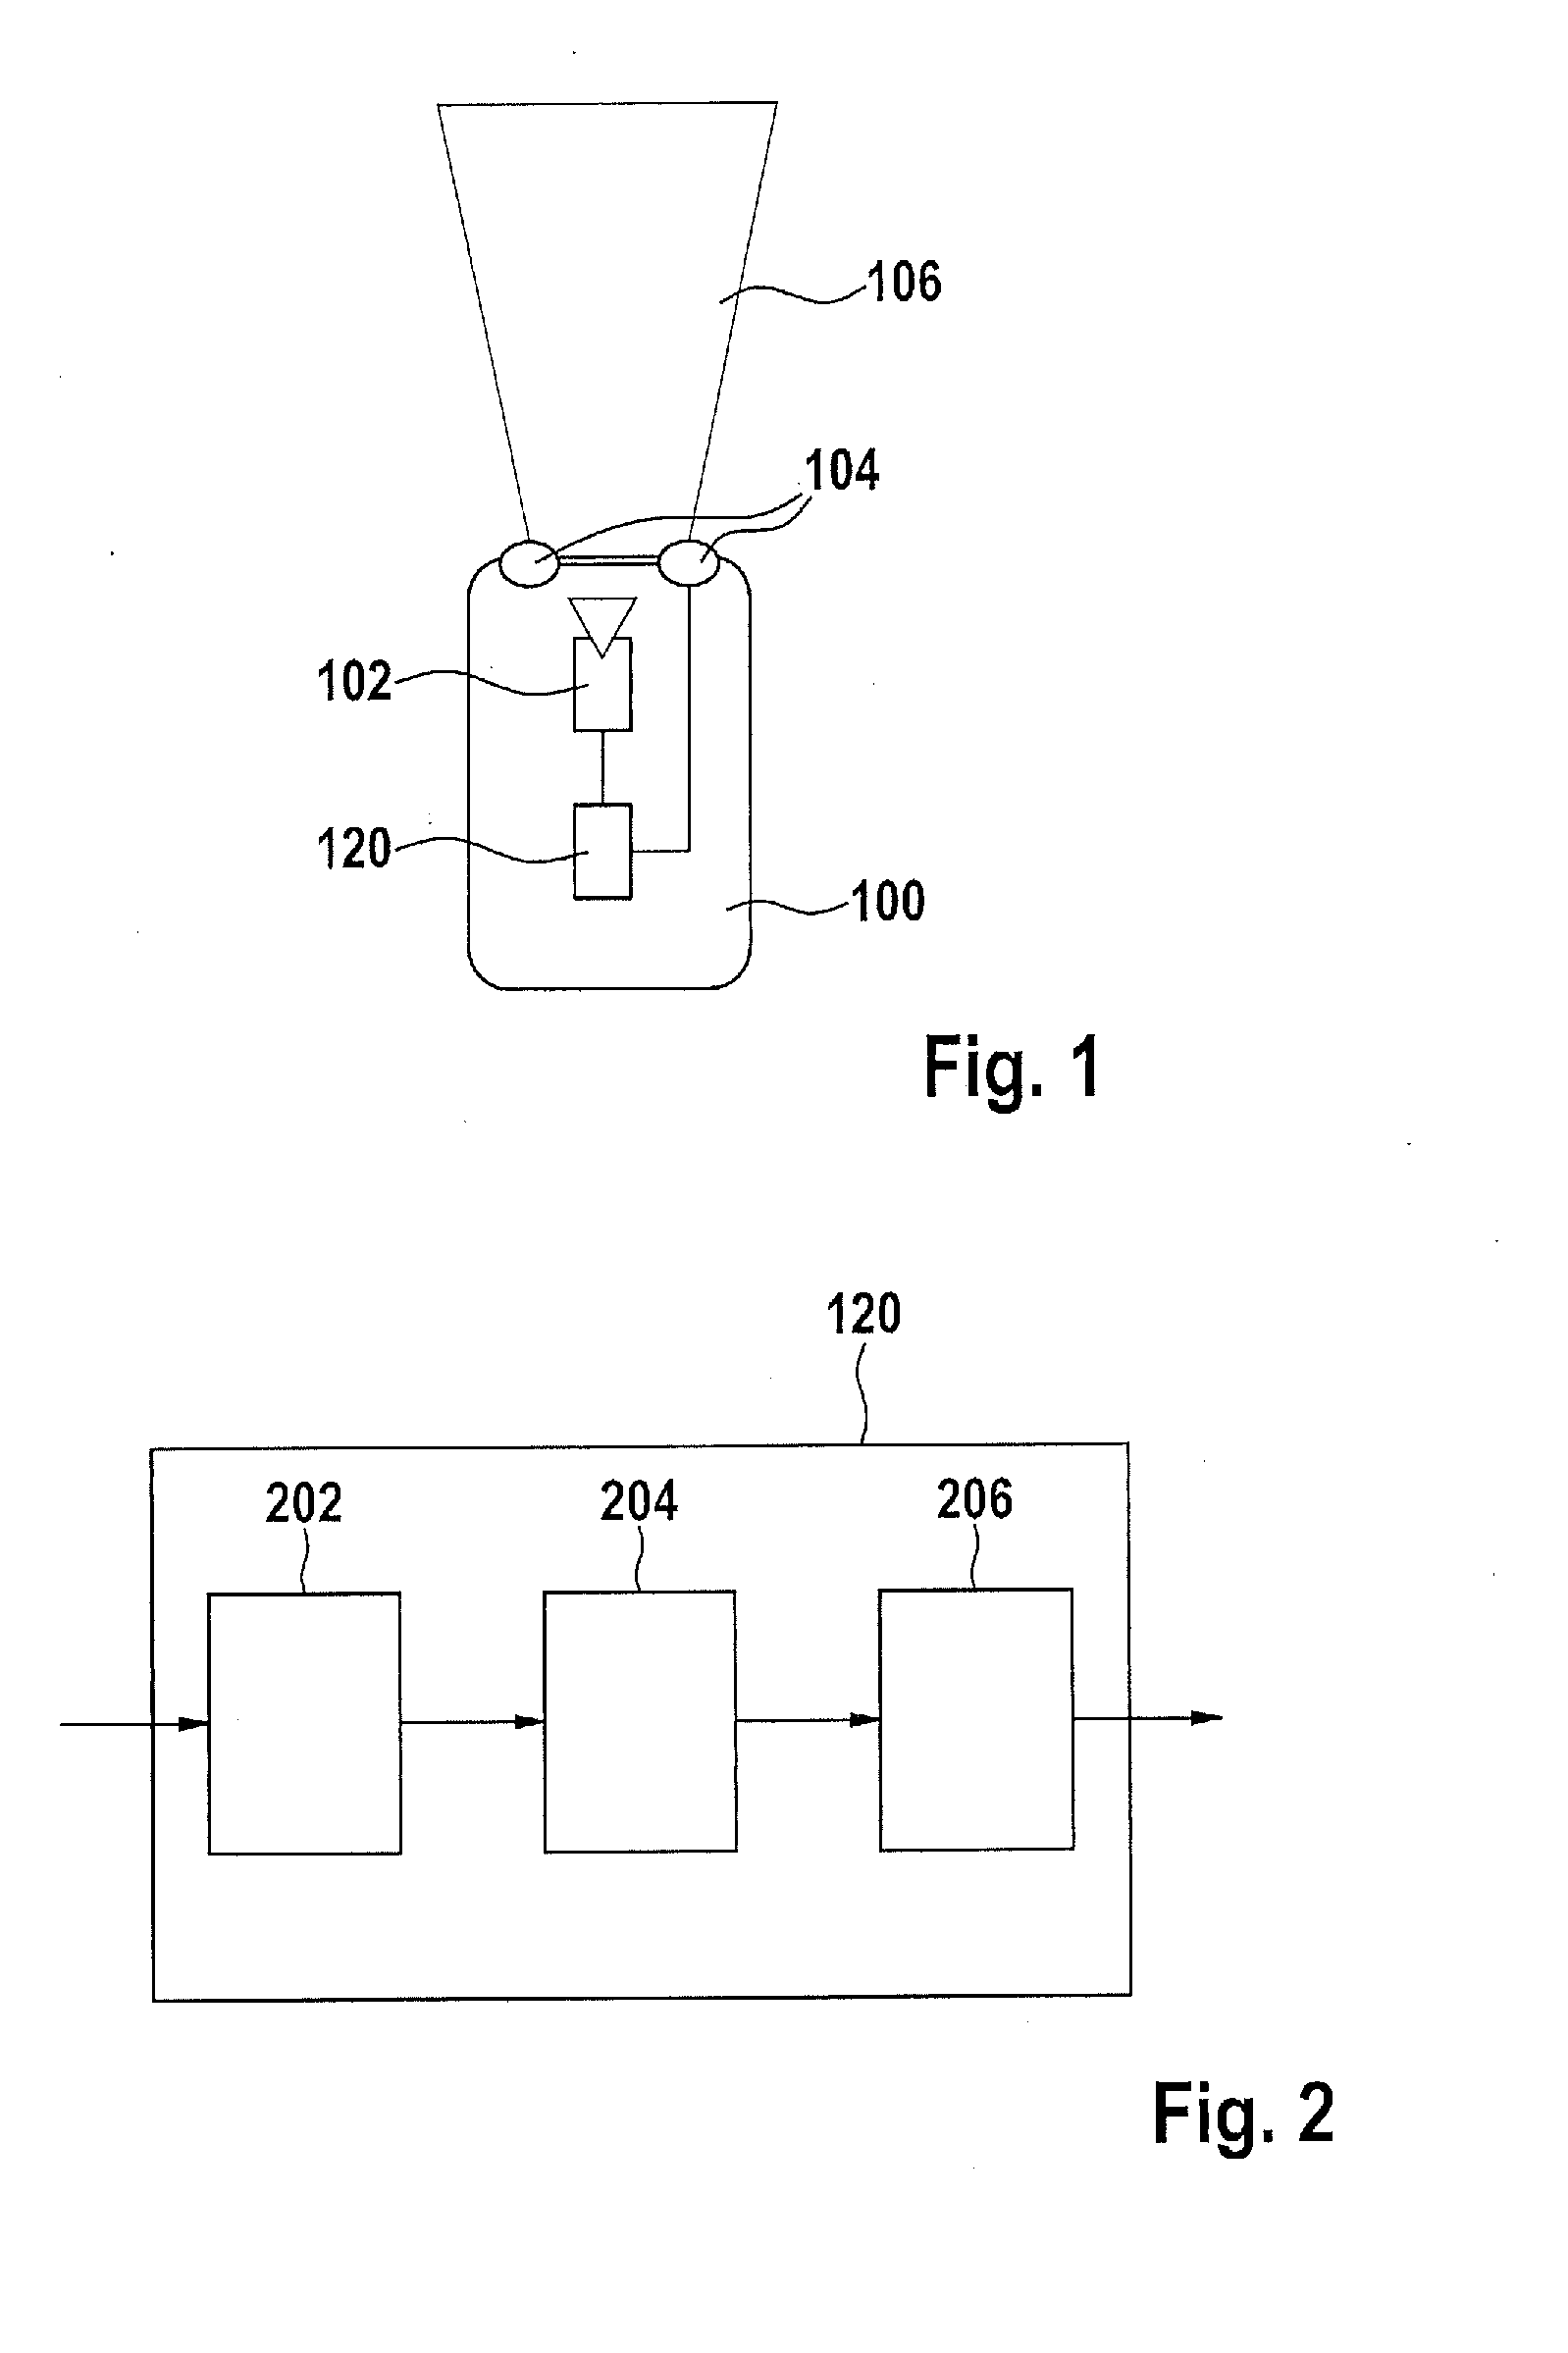 Method and control device for switching on the high beam headlights of a vehicle